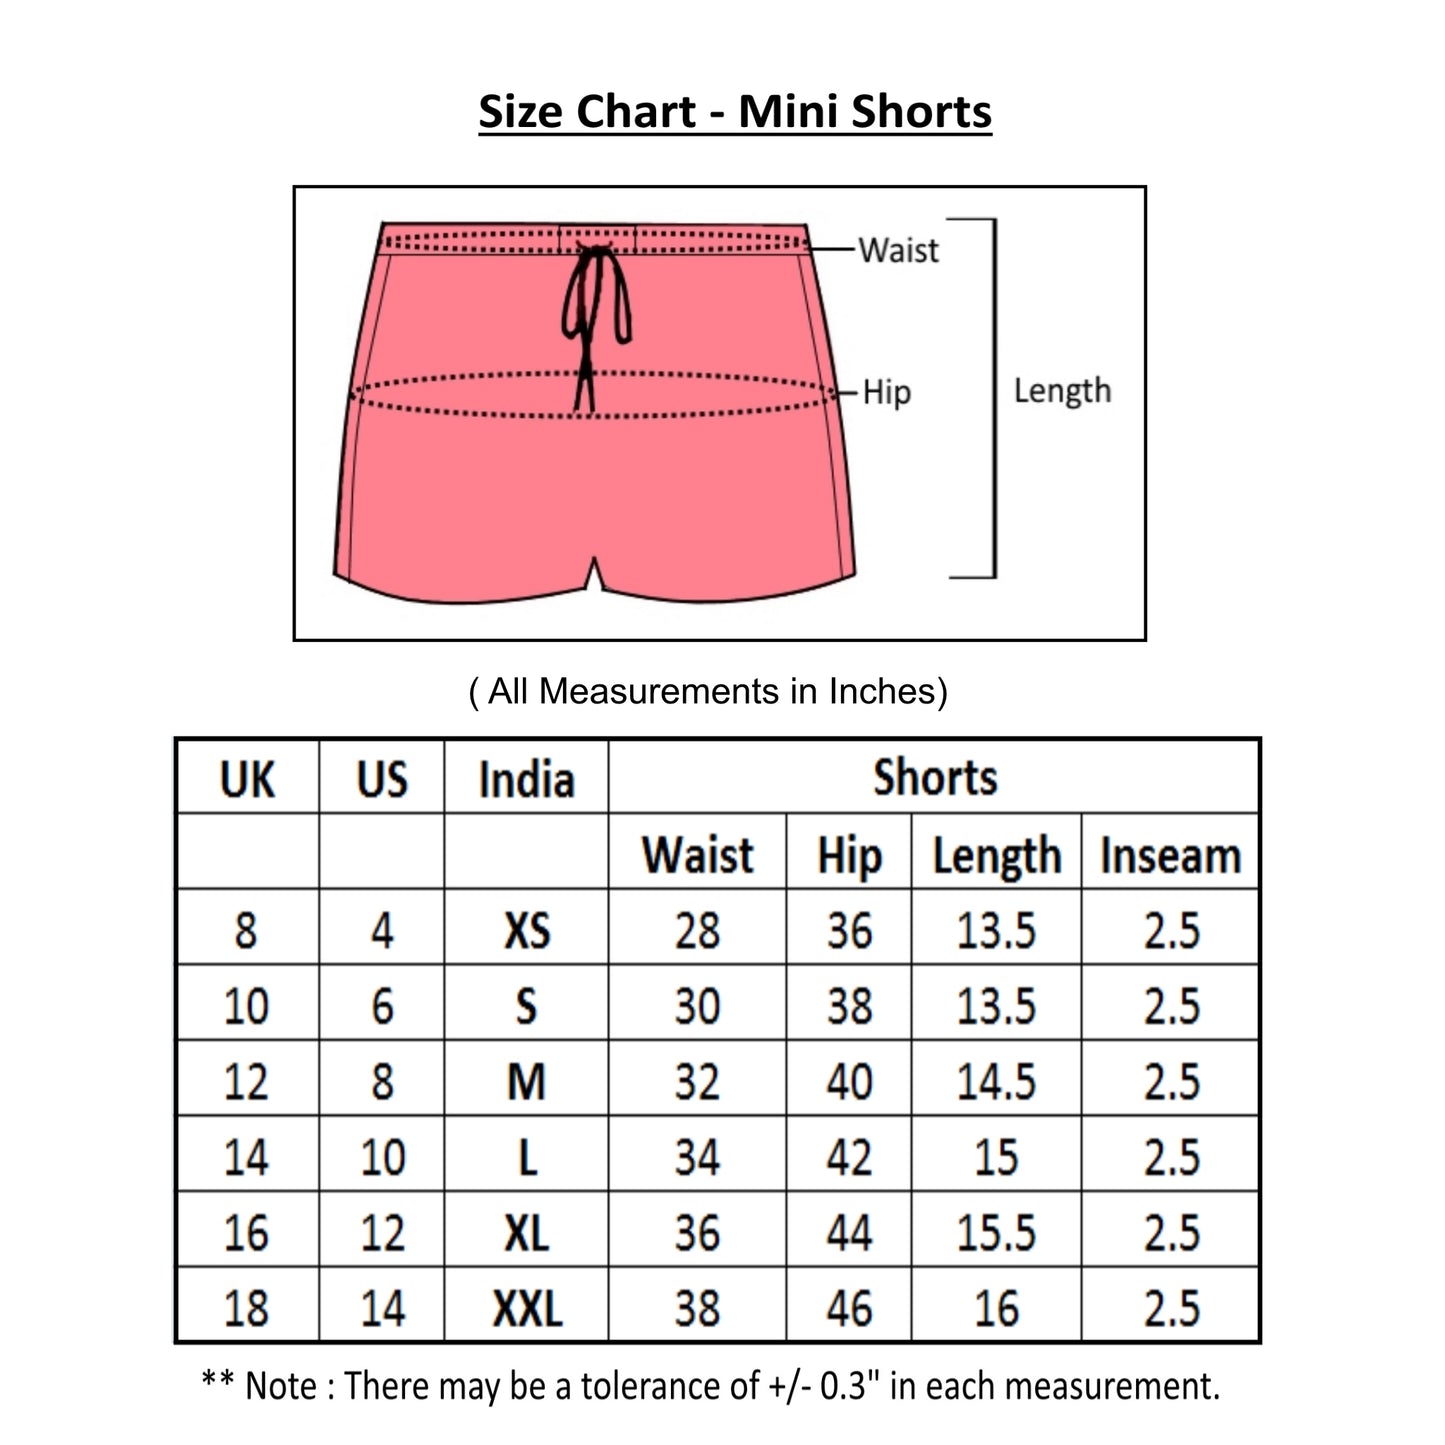 size chart of mini shorts with measurements for all sizes